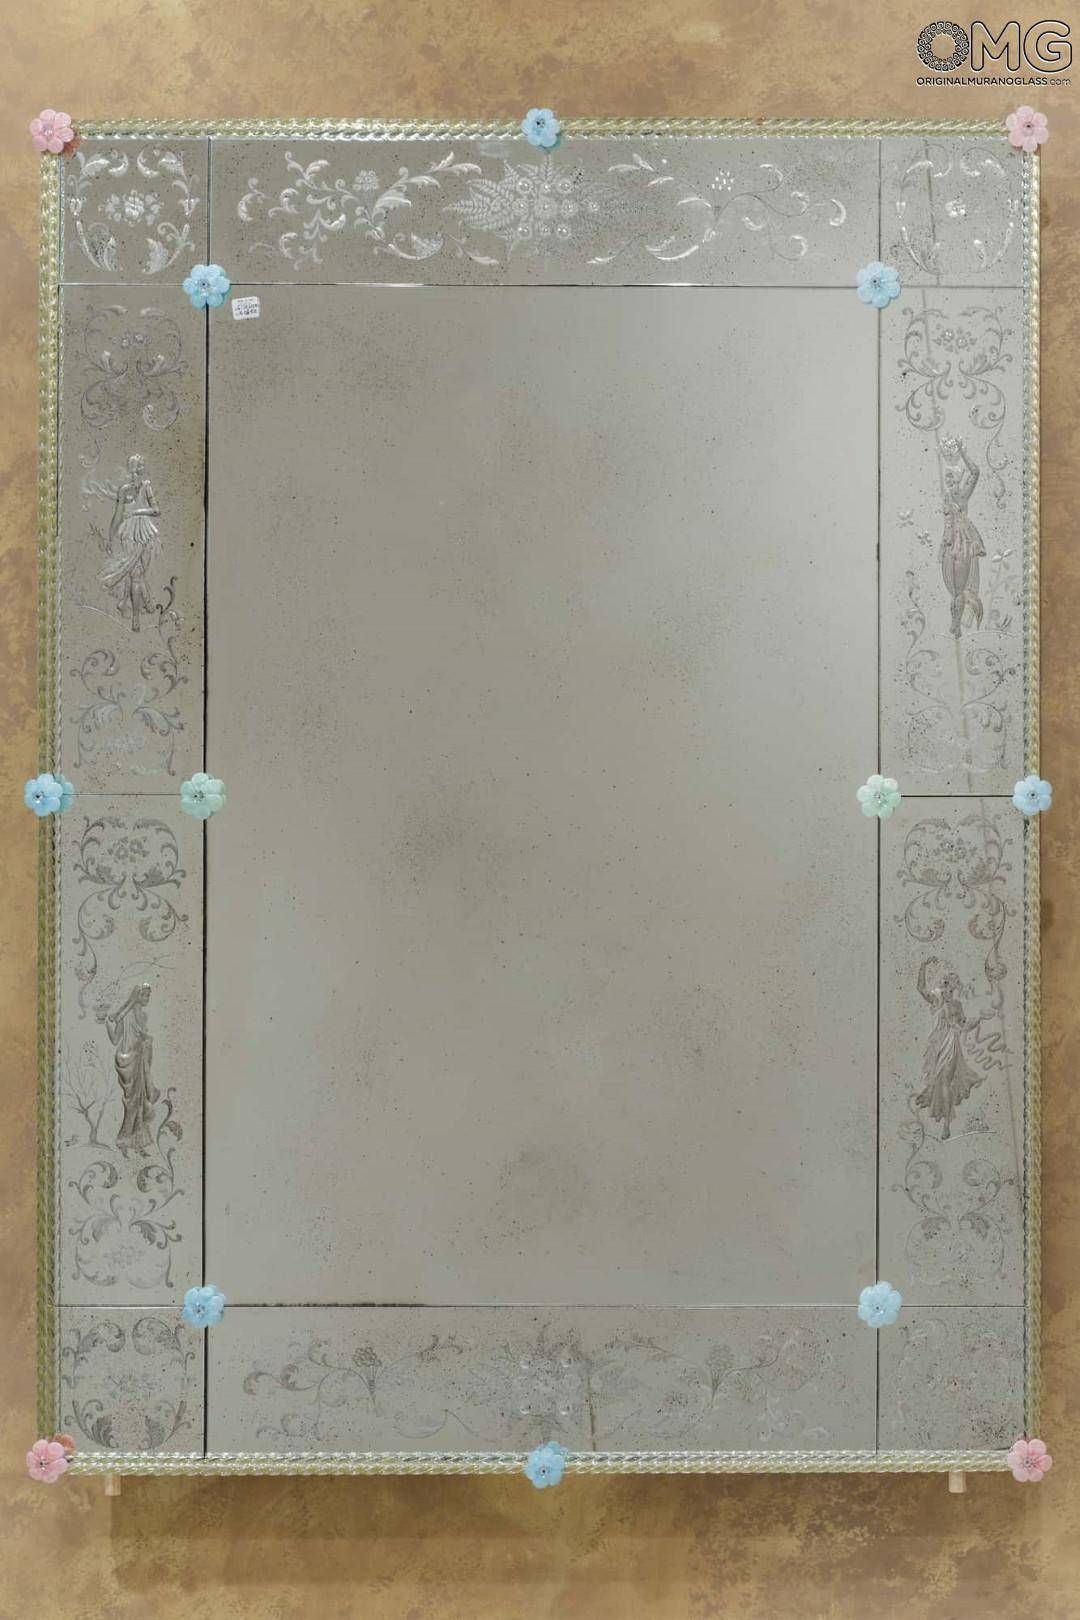 Venetian Mirrors Original From Murano Venice Italy – Big Collection With Venetian Glass Mirrors (View 3 of 15)